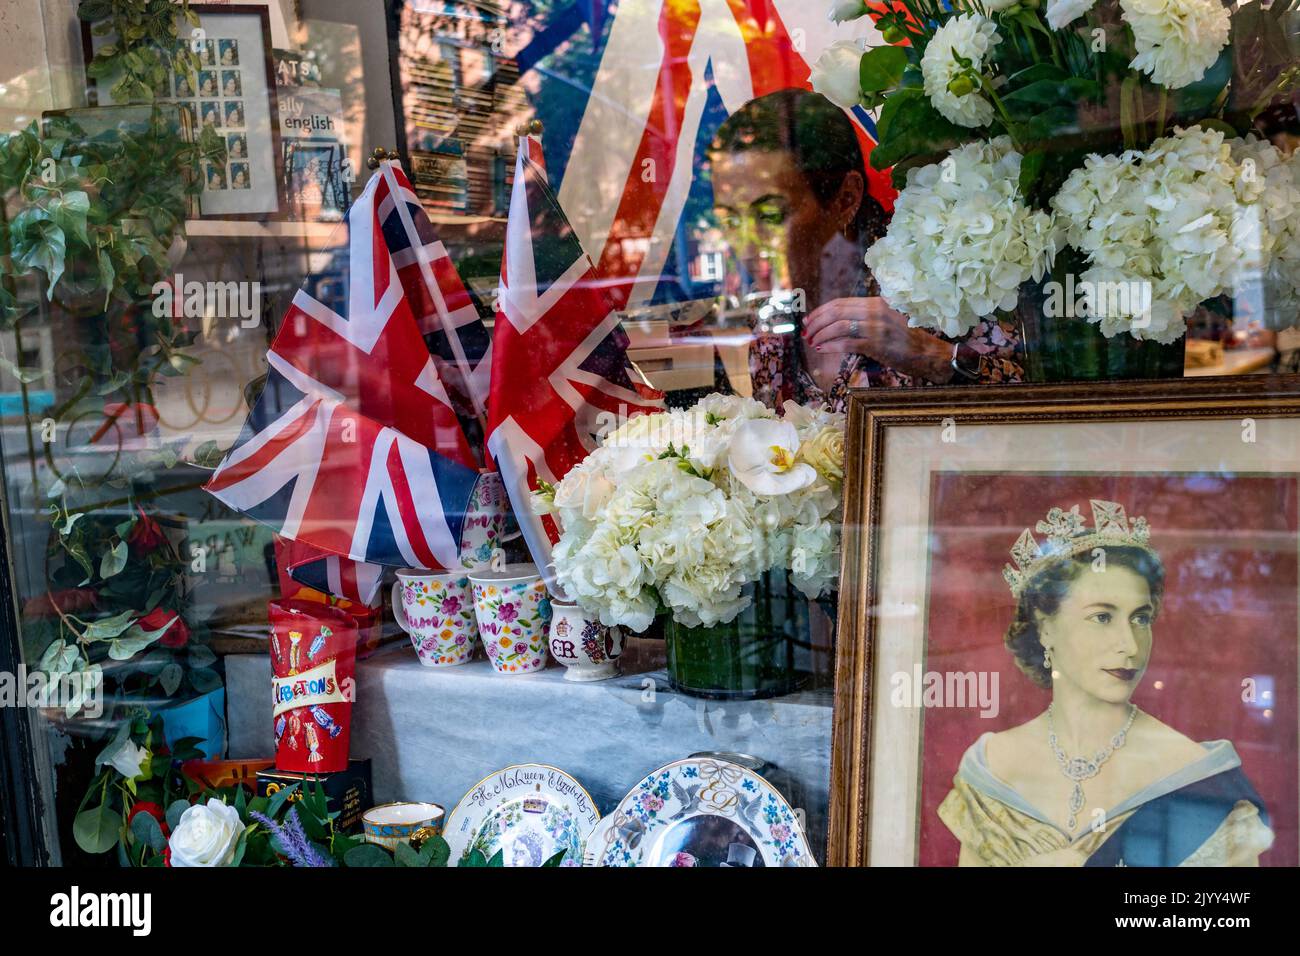 A worker adjusts the memorial to Queen Elizabeth II in the window of the Anglophile store Myers of Keswick in Greenwich Village in New York on Thursday, September 8, 2022. The long-reigning monarch of the United Kingdom died at the age of 96 at Balmoral Castle in Scotland. (© Richard B. Levine) Stock Photo